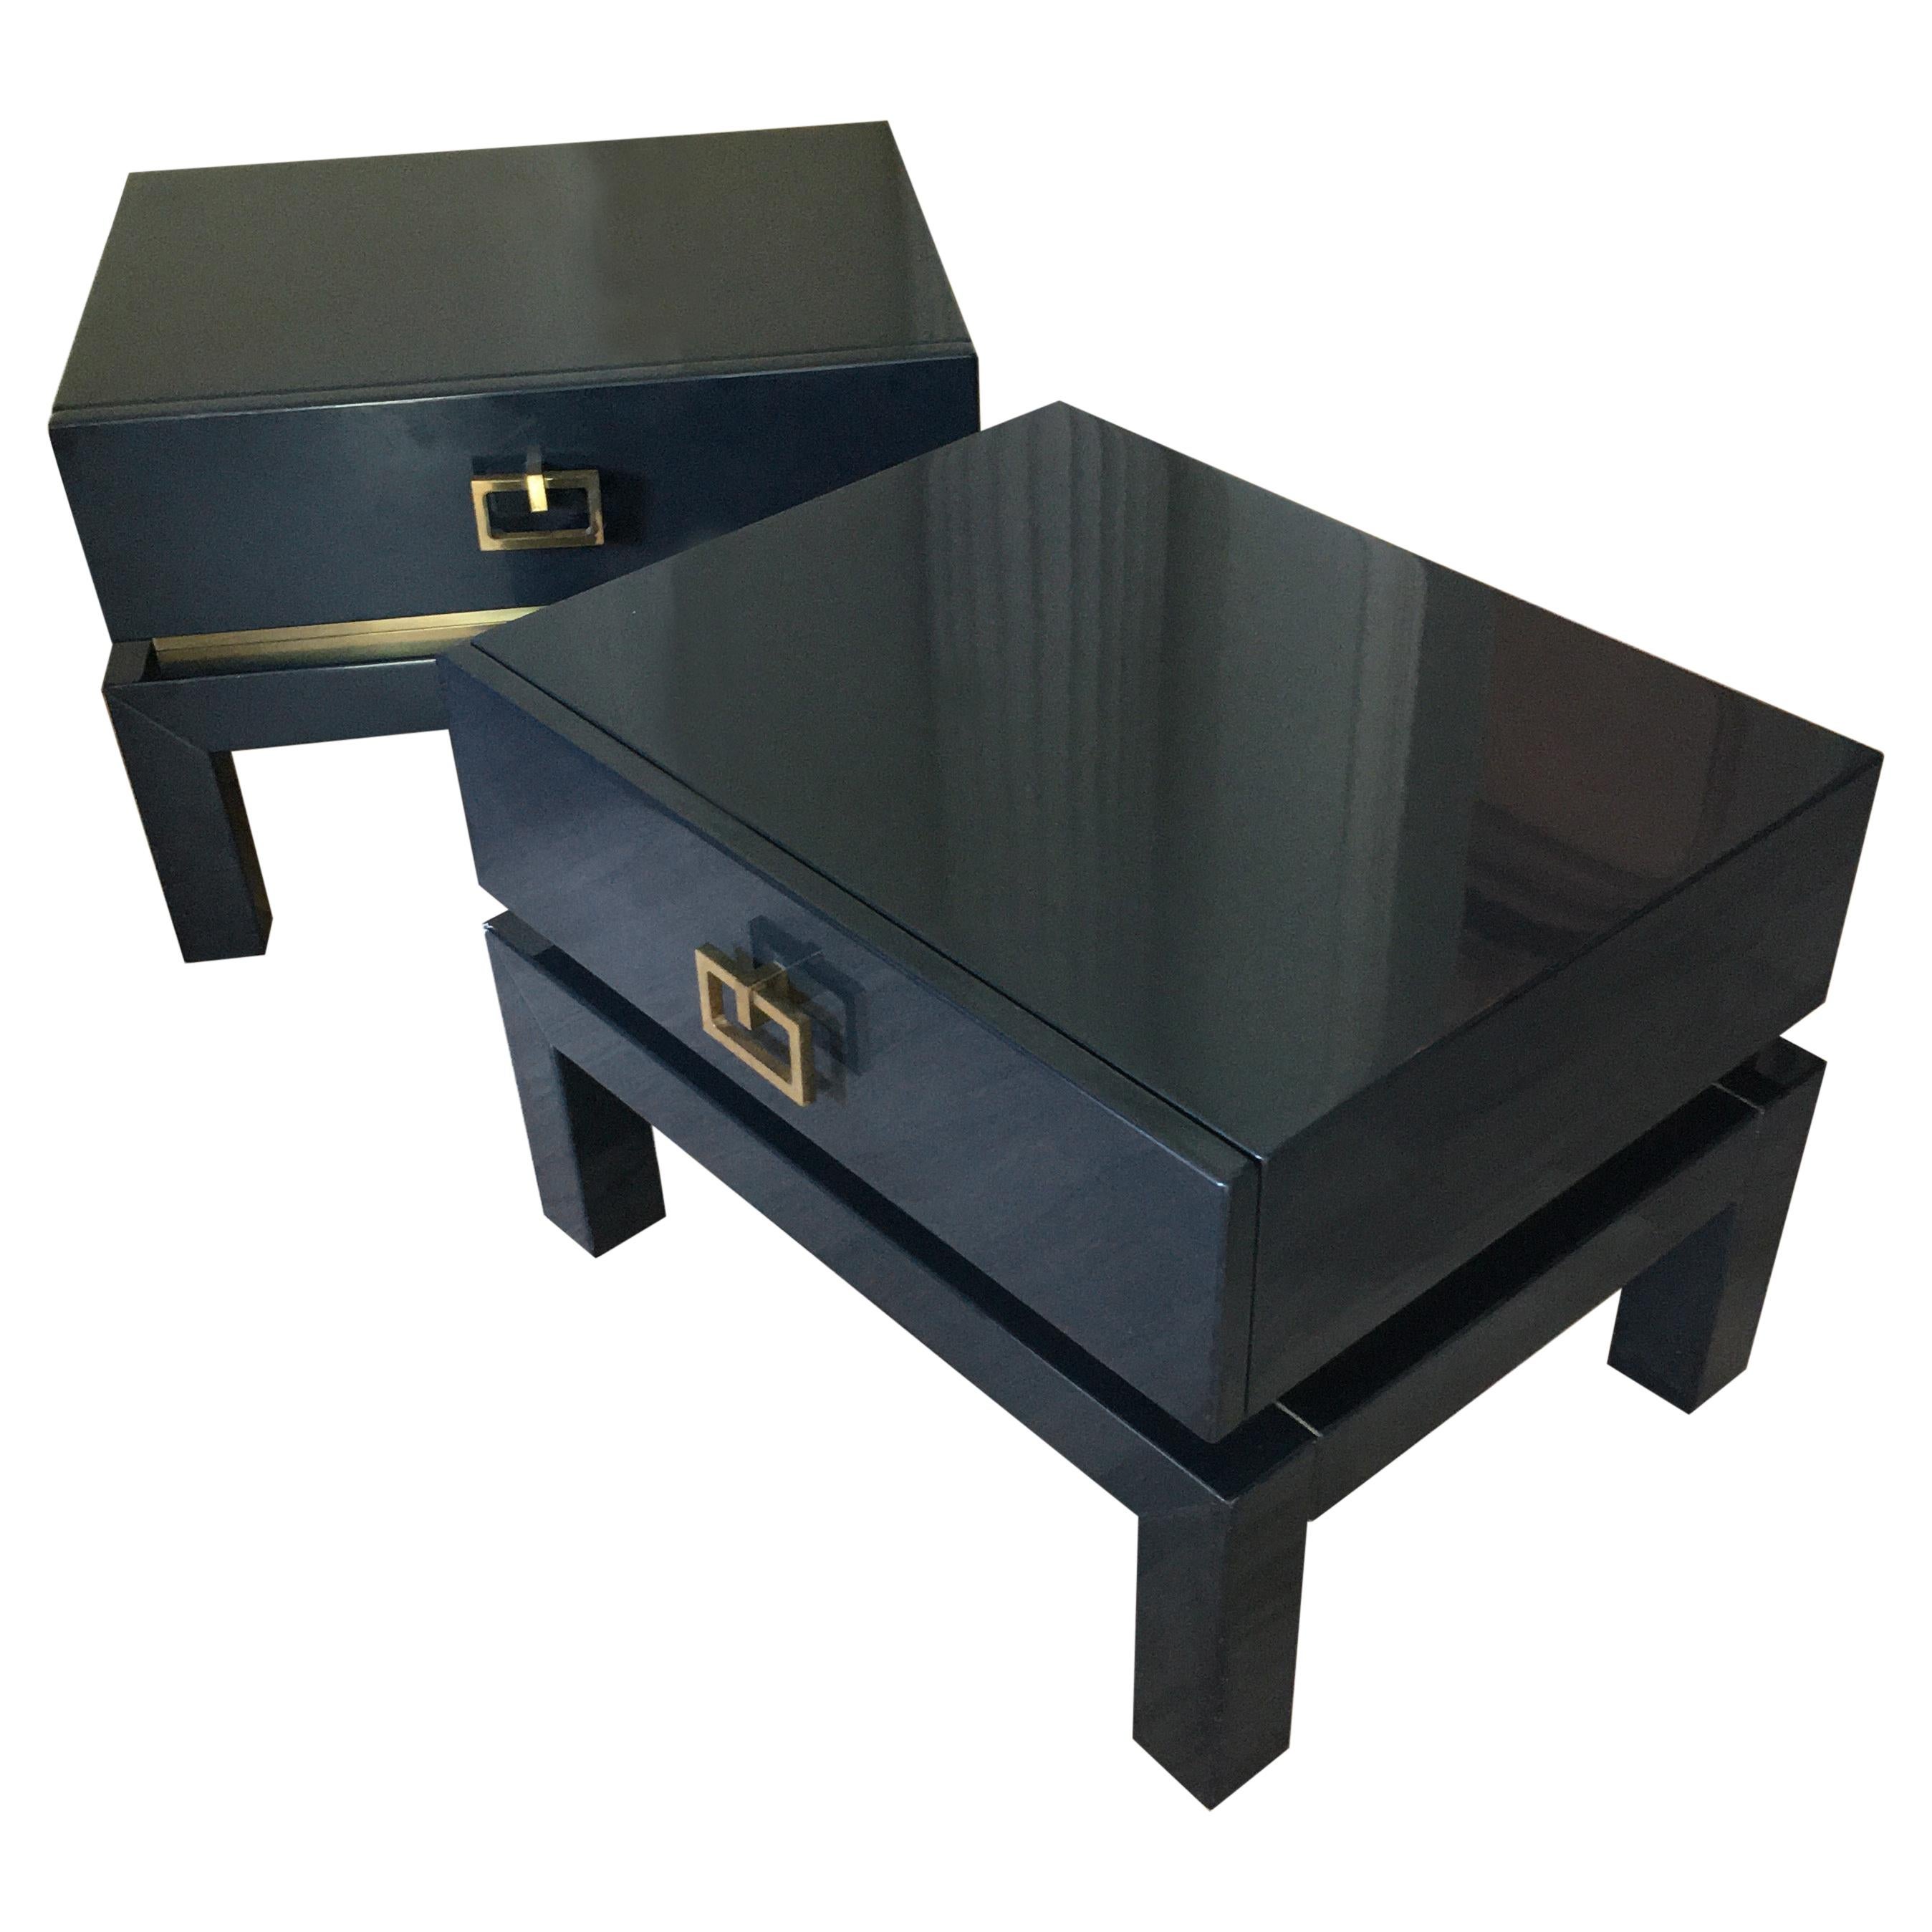 Night Blue Lacquer Side Tables with Brass Details by Maison Jansen, France 1975